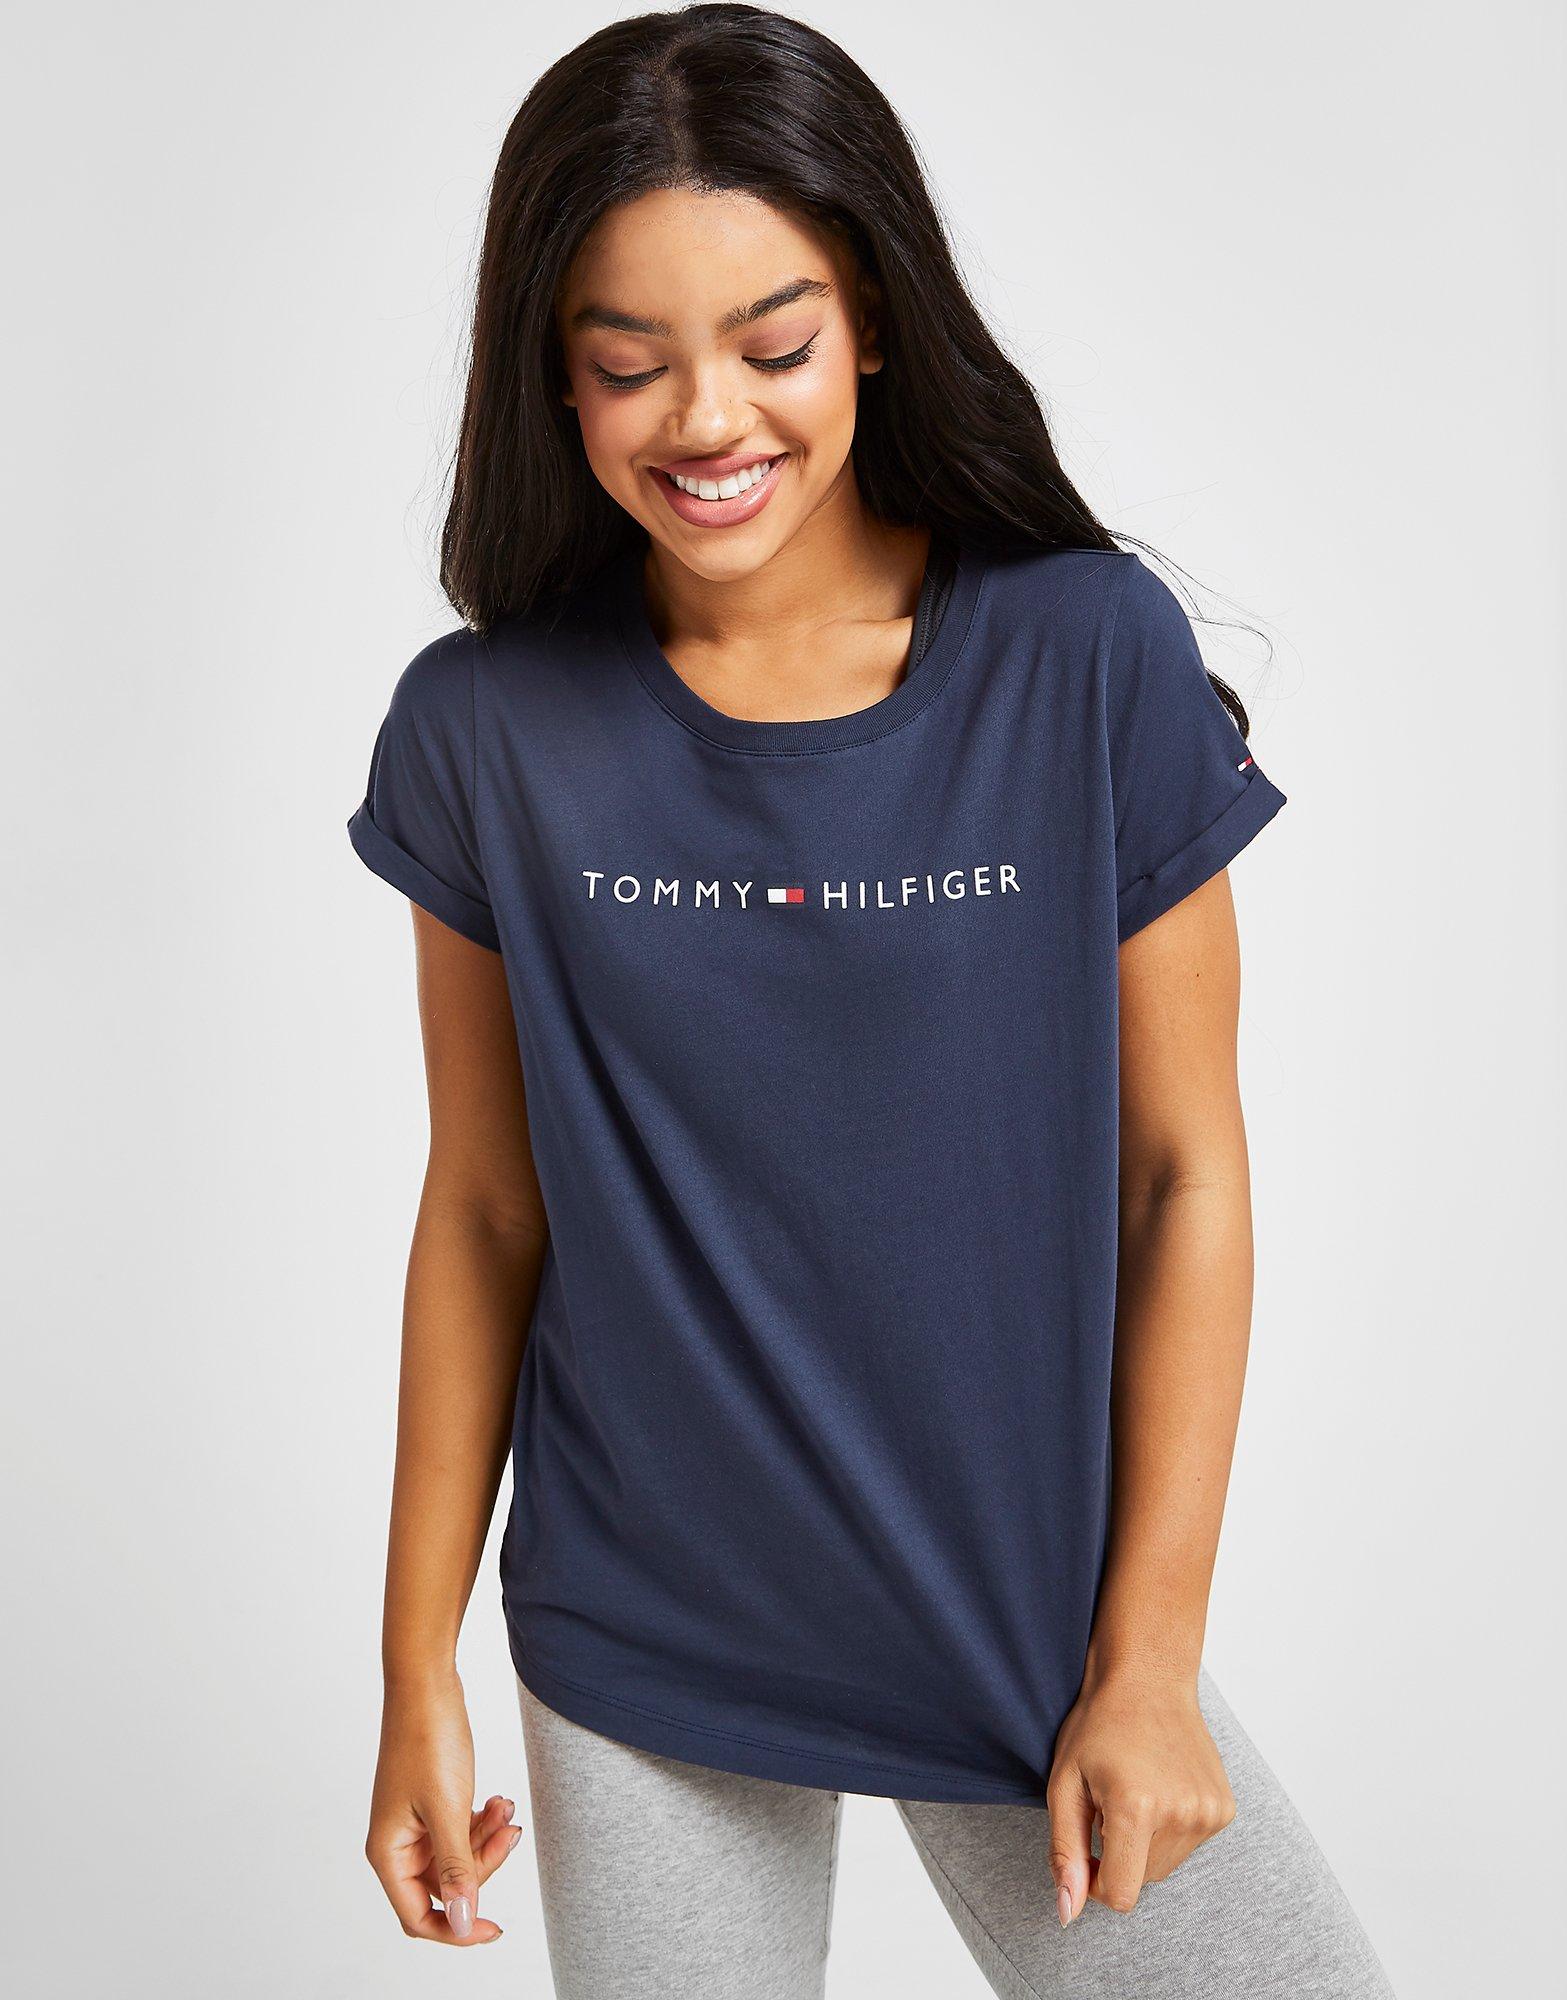 tommy hilfiger tee womens